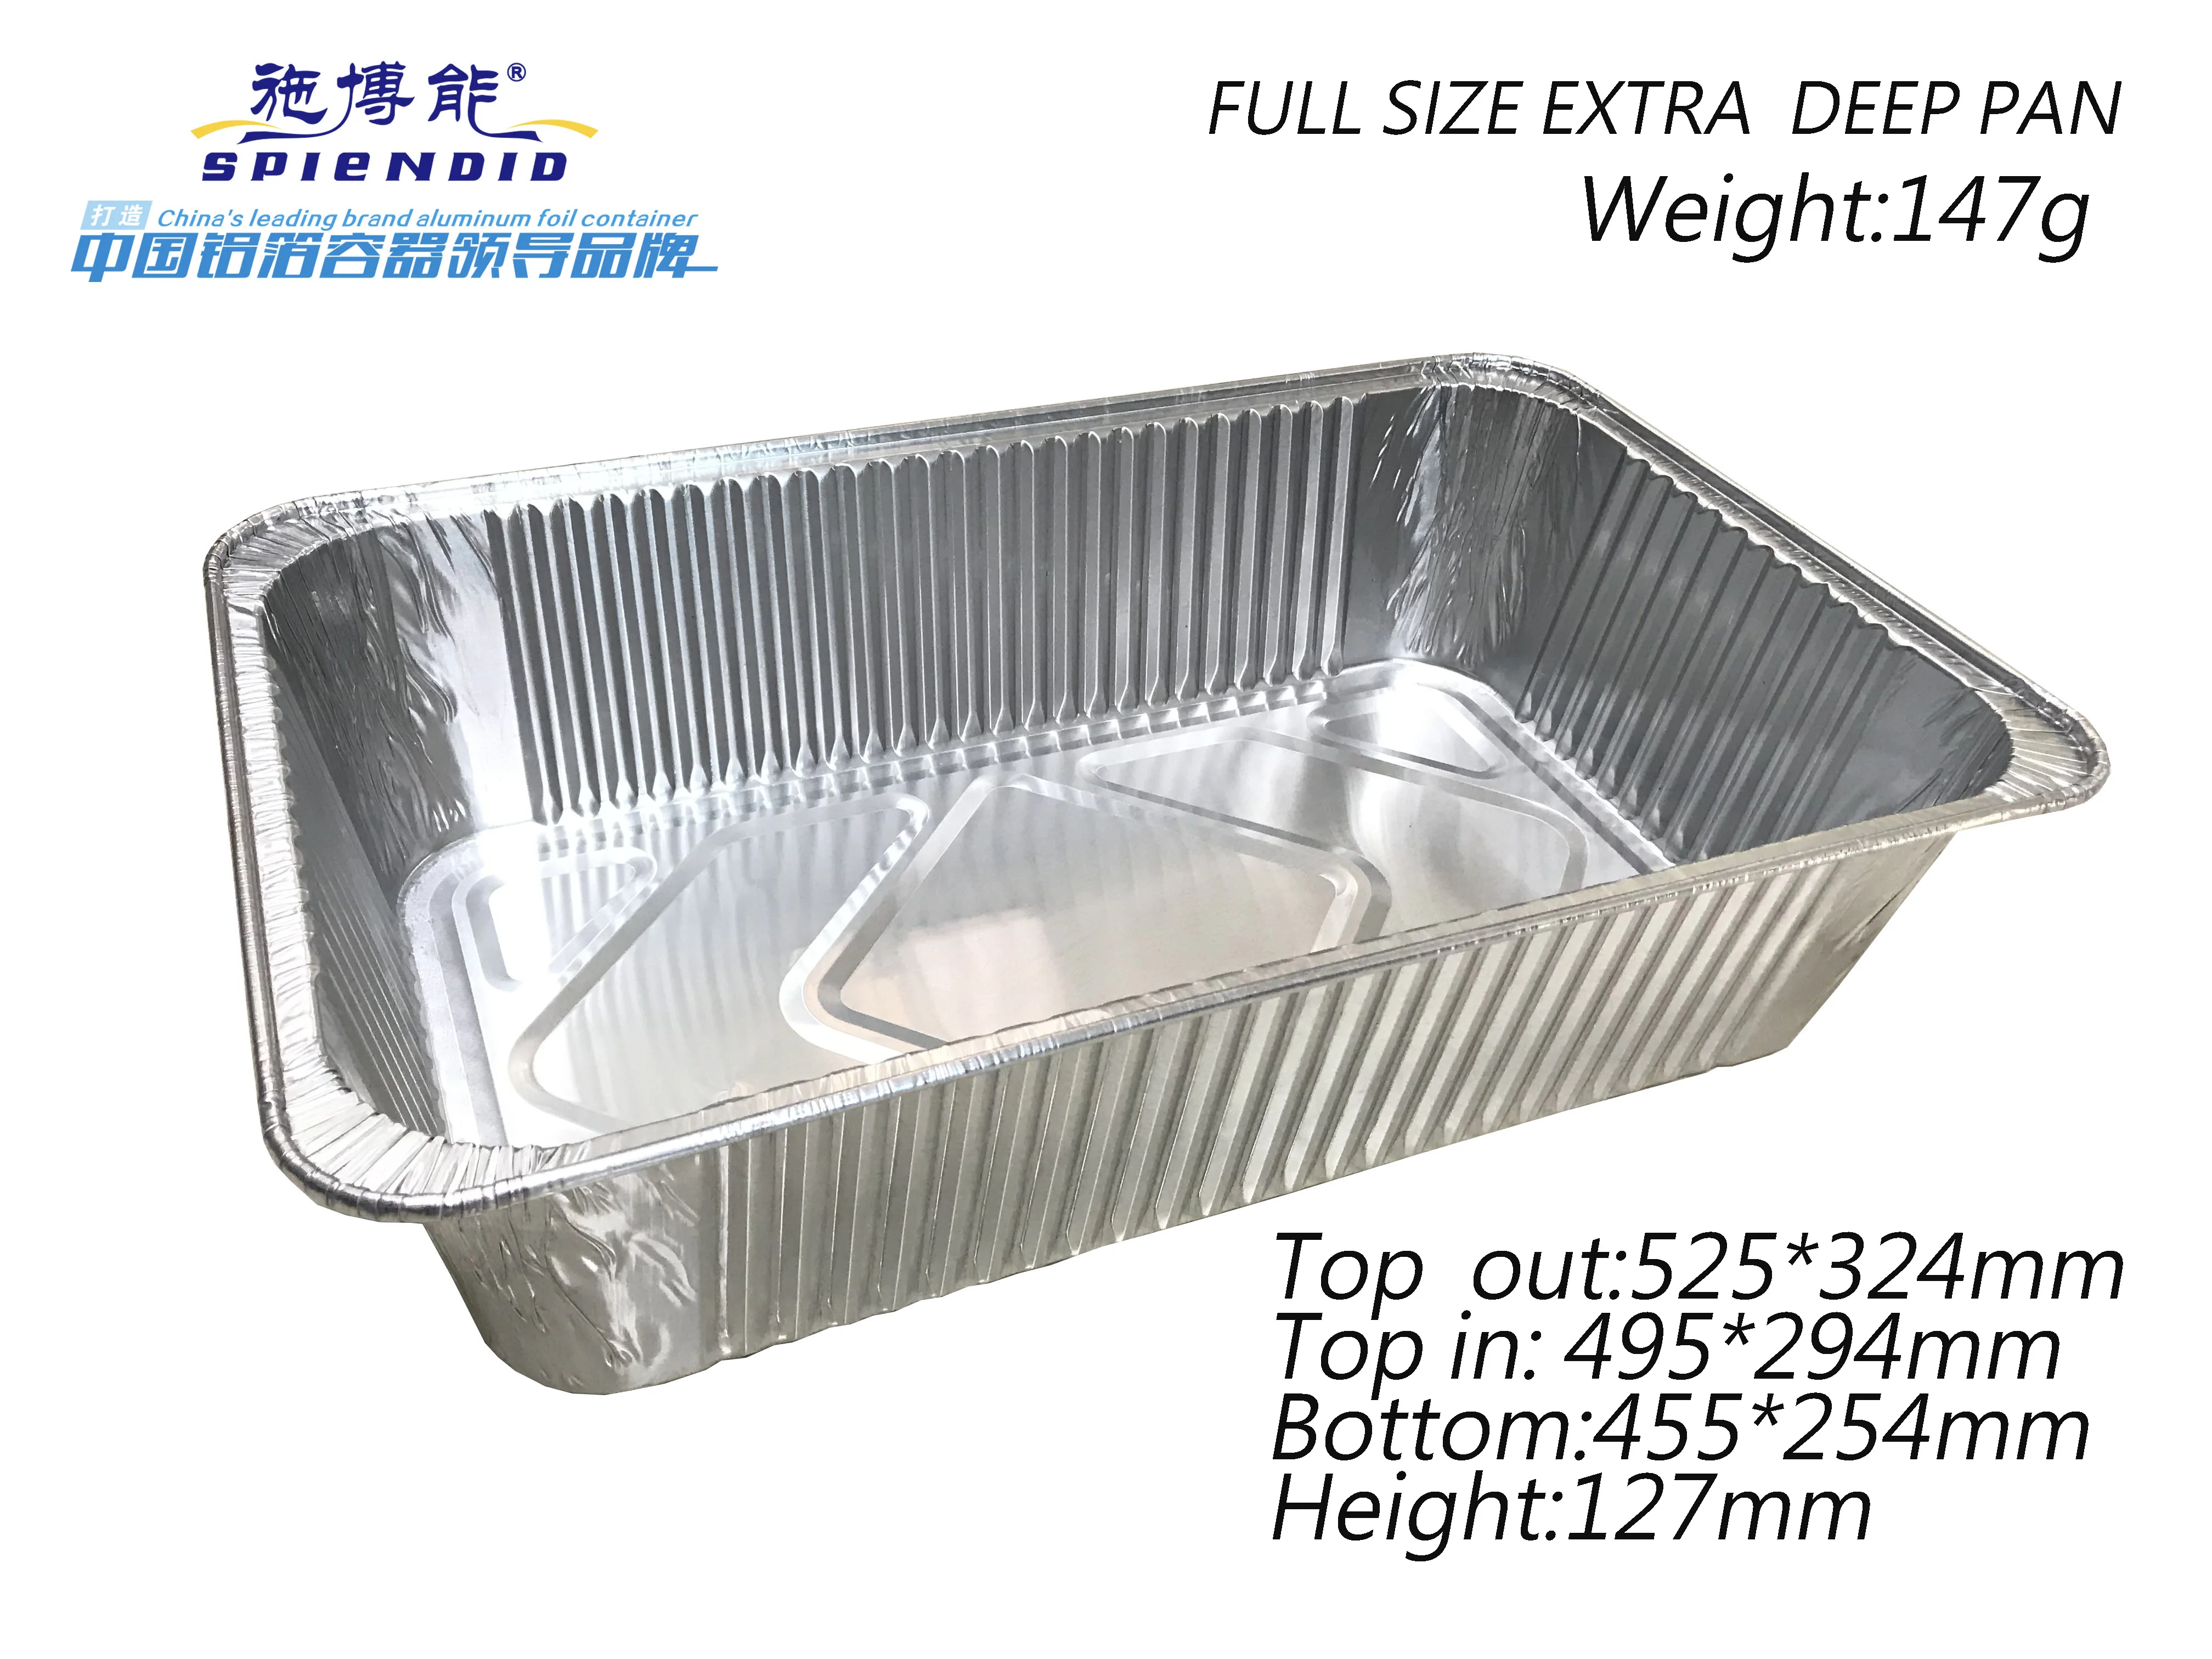 Full Size Extra Deep Large Steam Table Aluminum Foil Tray For Party Barbecue Tray Aluminum Foil Container Buy Alumium Foil Container For Party Tray Aluminum Foil Barbecue Tray Full Size Extra Deep Foil Container